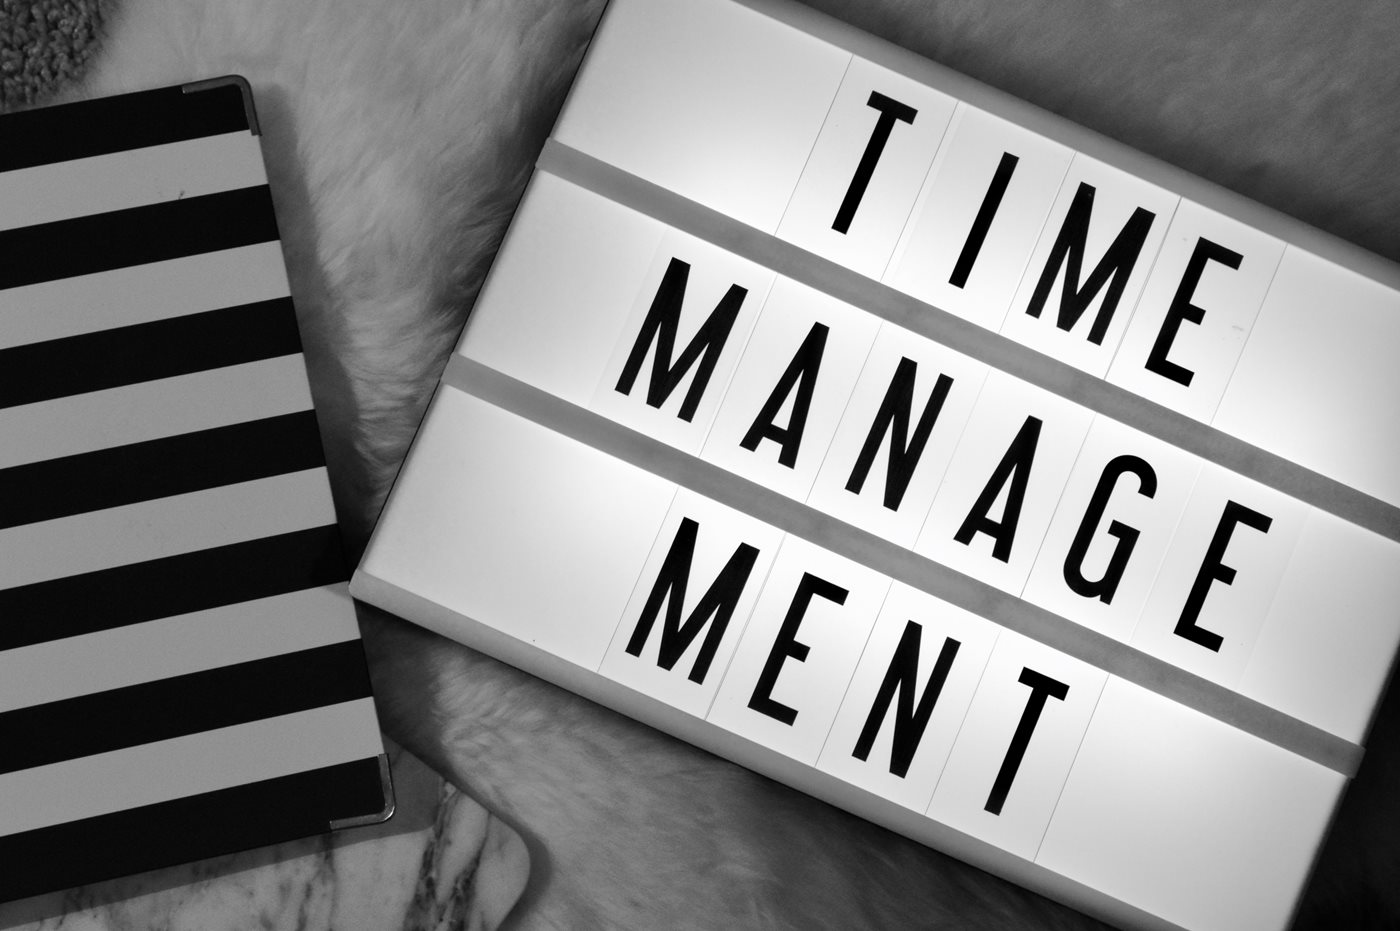 A Distance Education Student's Guide to Time Management teaser image